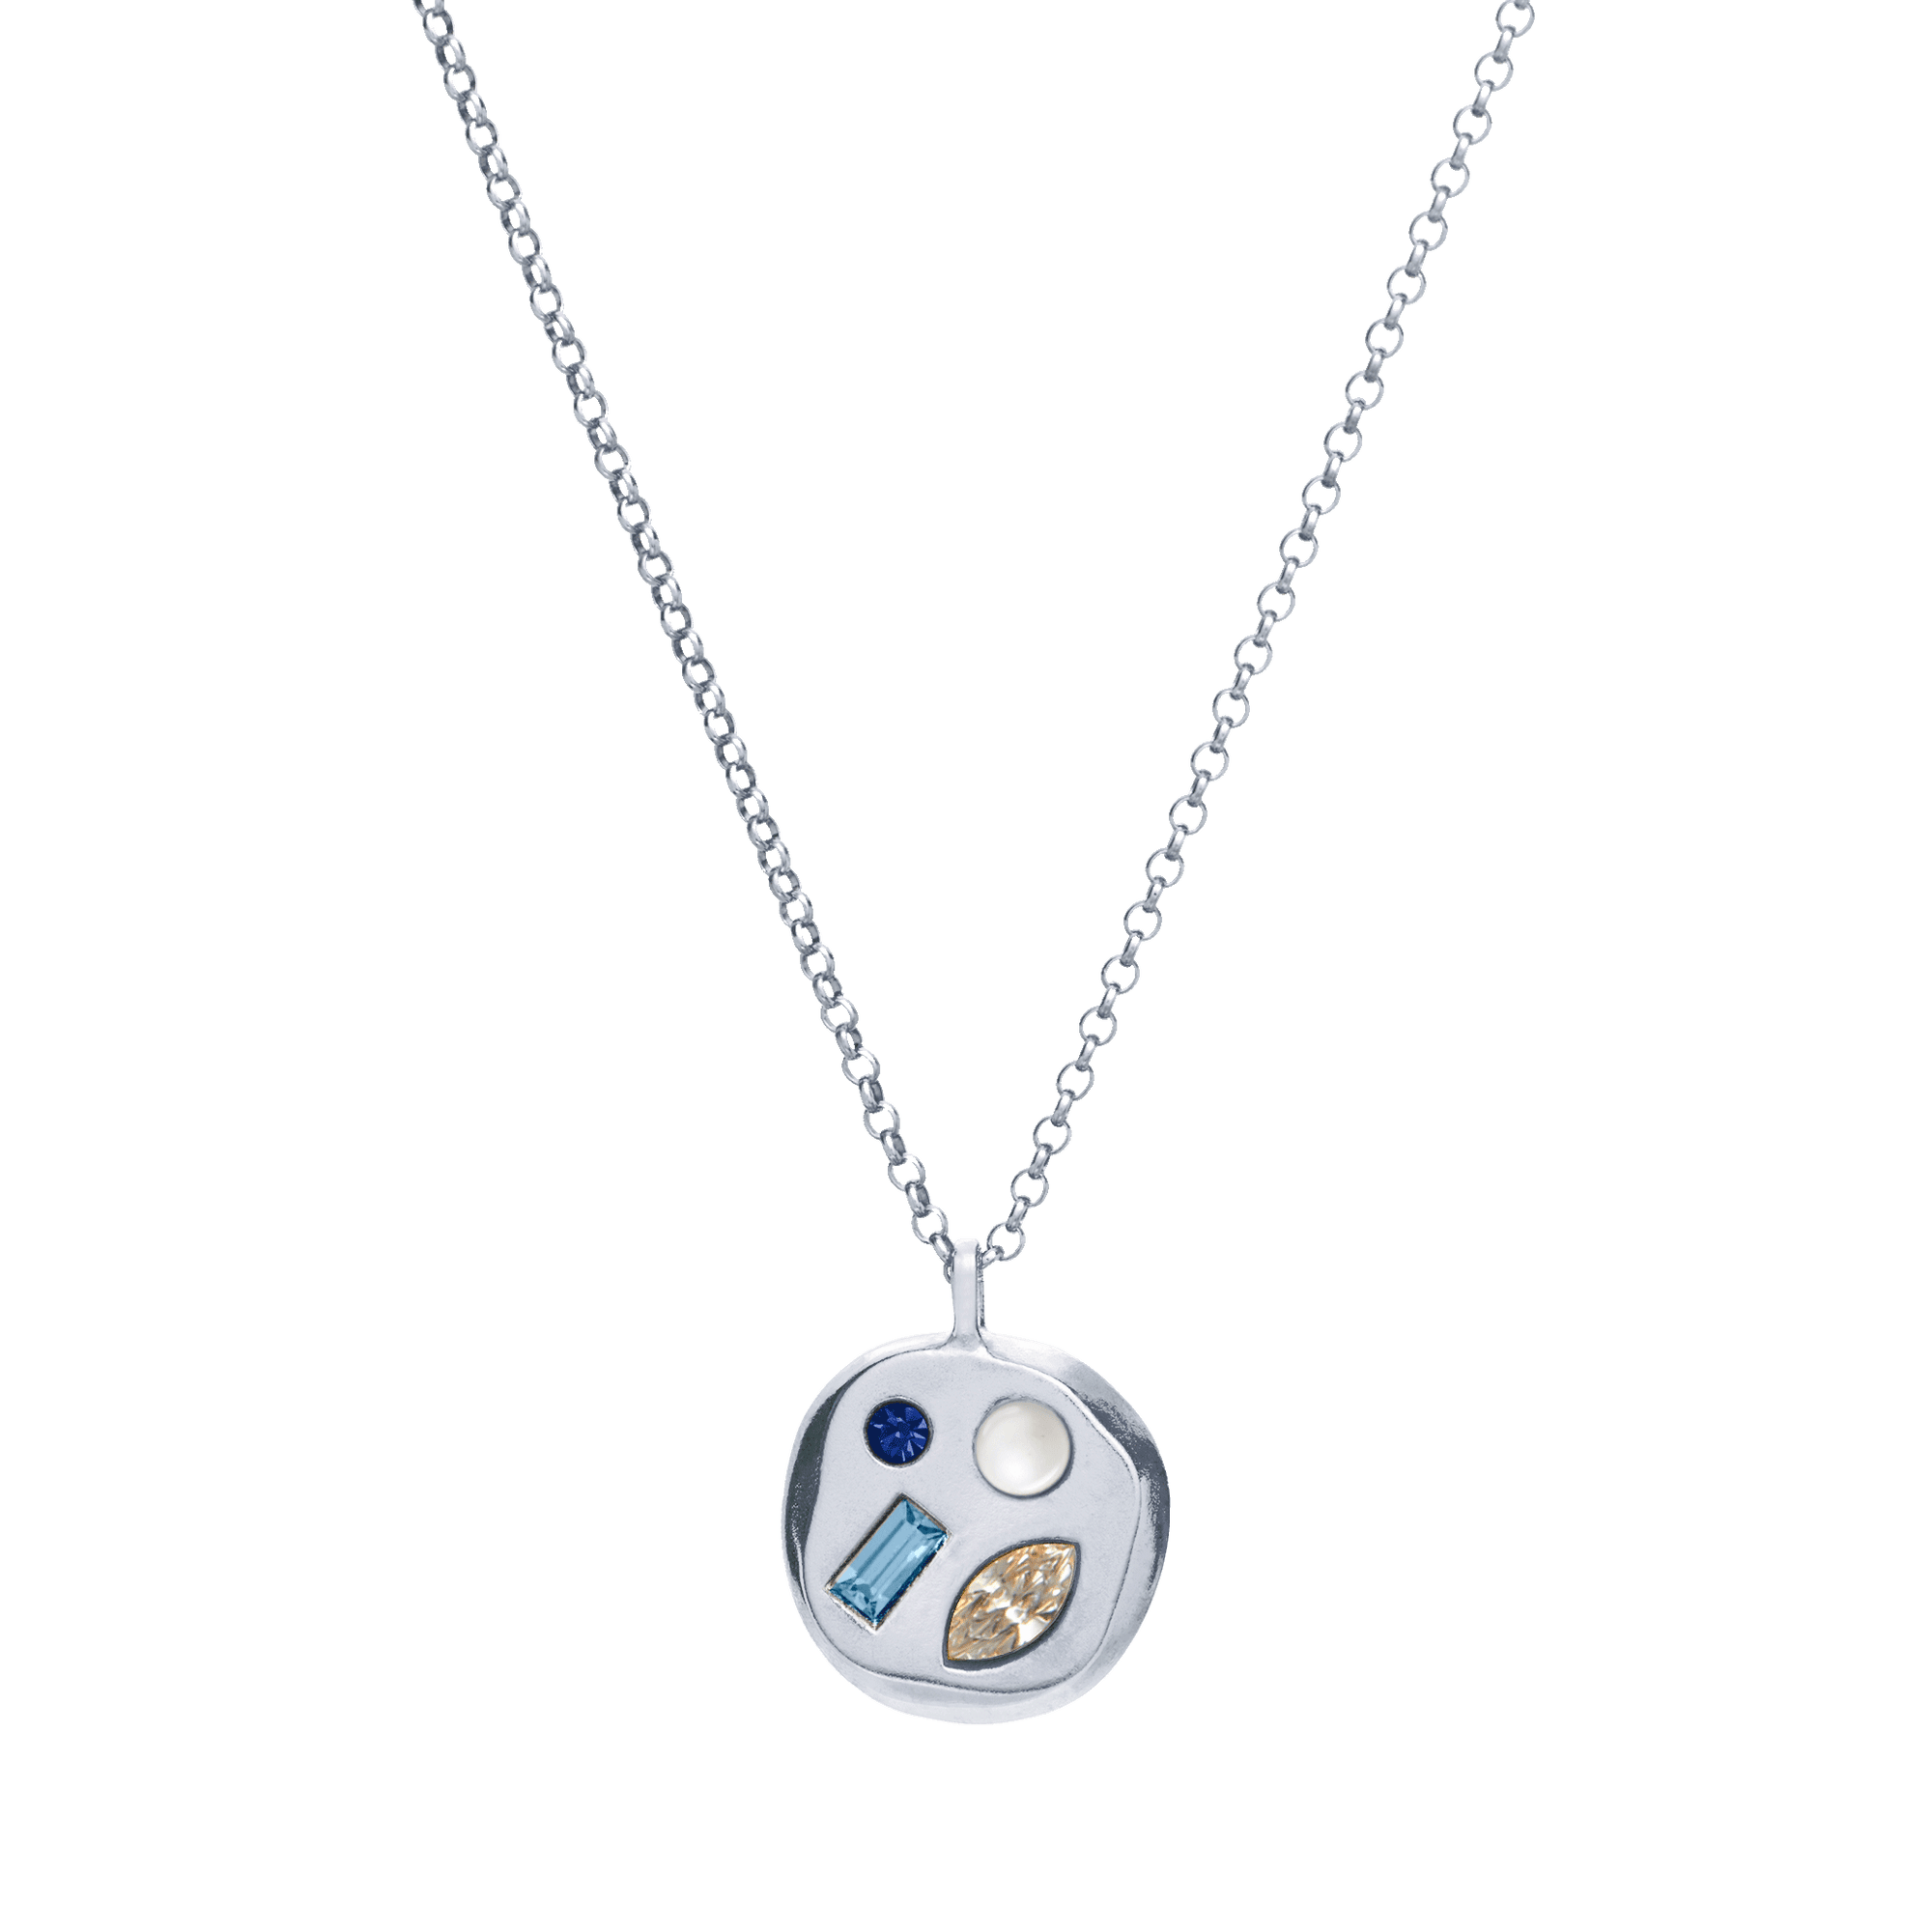 The April Seventeenth Pendant in Sterling Silver